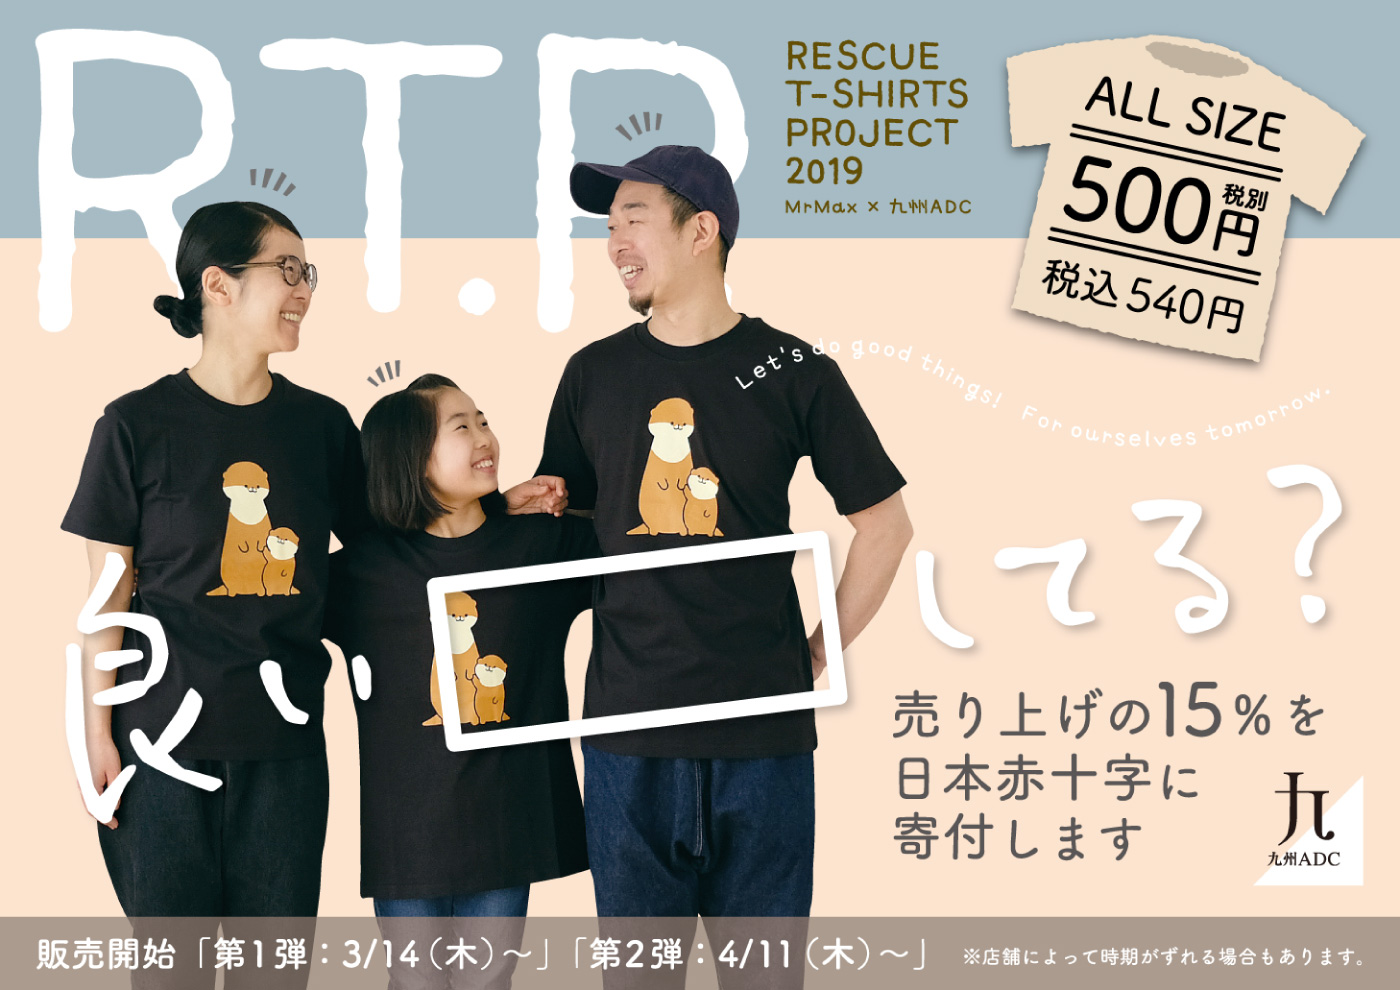 RESCUE T-SHIRTS PROJECT 2019